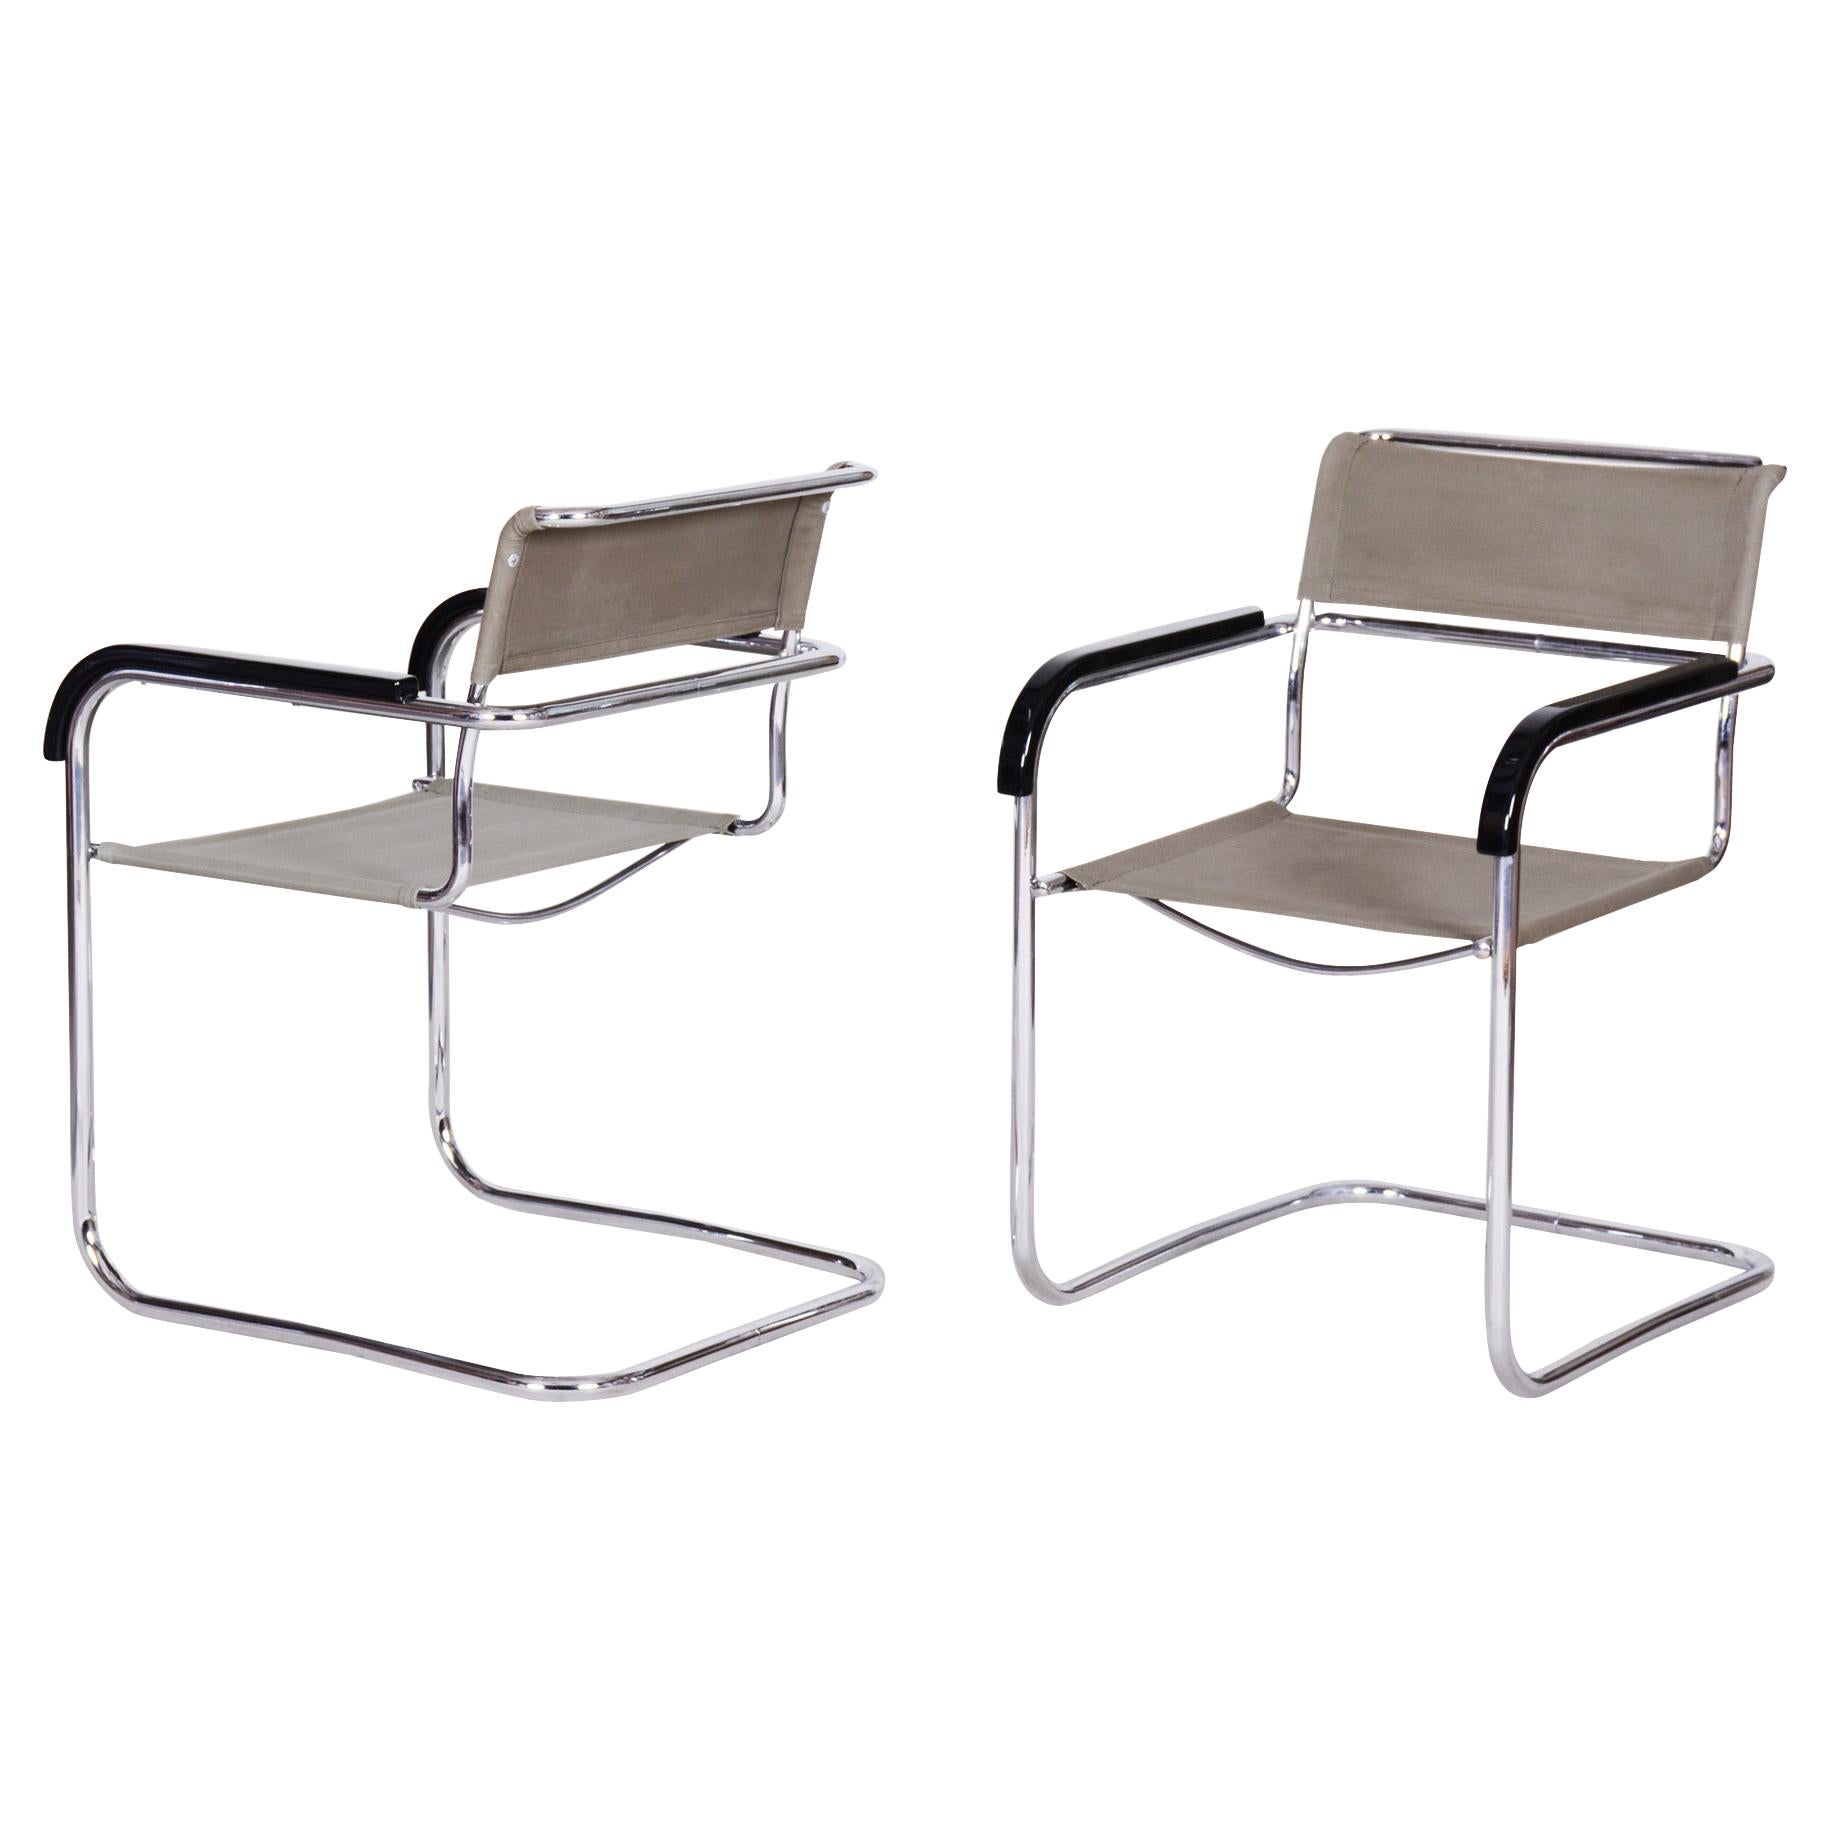 Pair of Czech Bauhaus Armchairs, Marcel Breuer and Thonet, Chrome, Fabric, 1930s For Sale